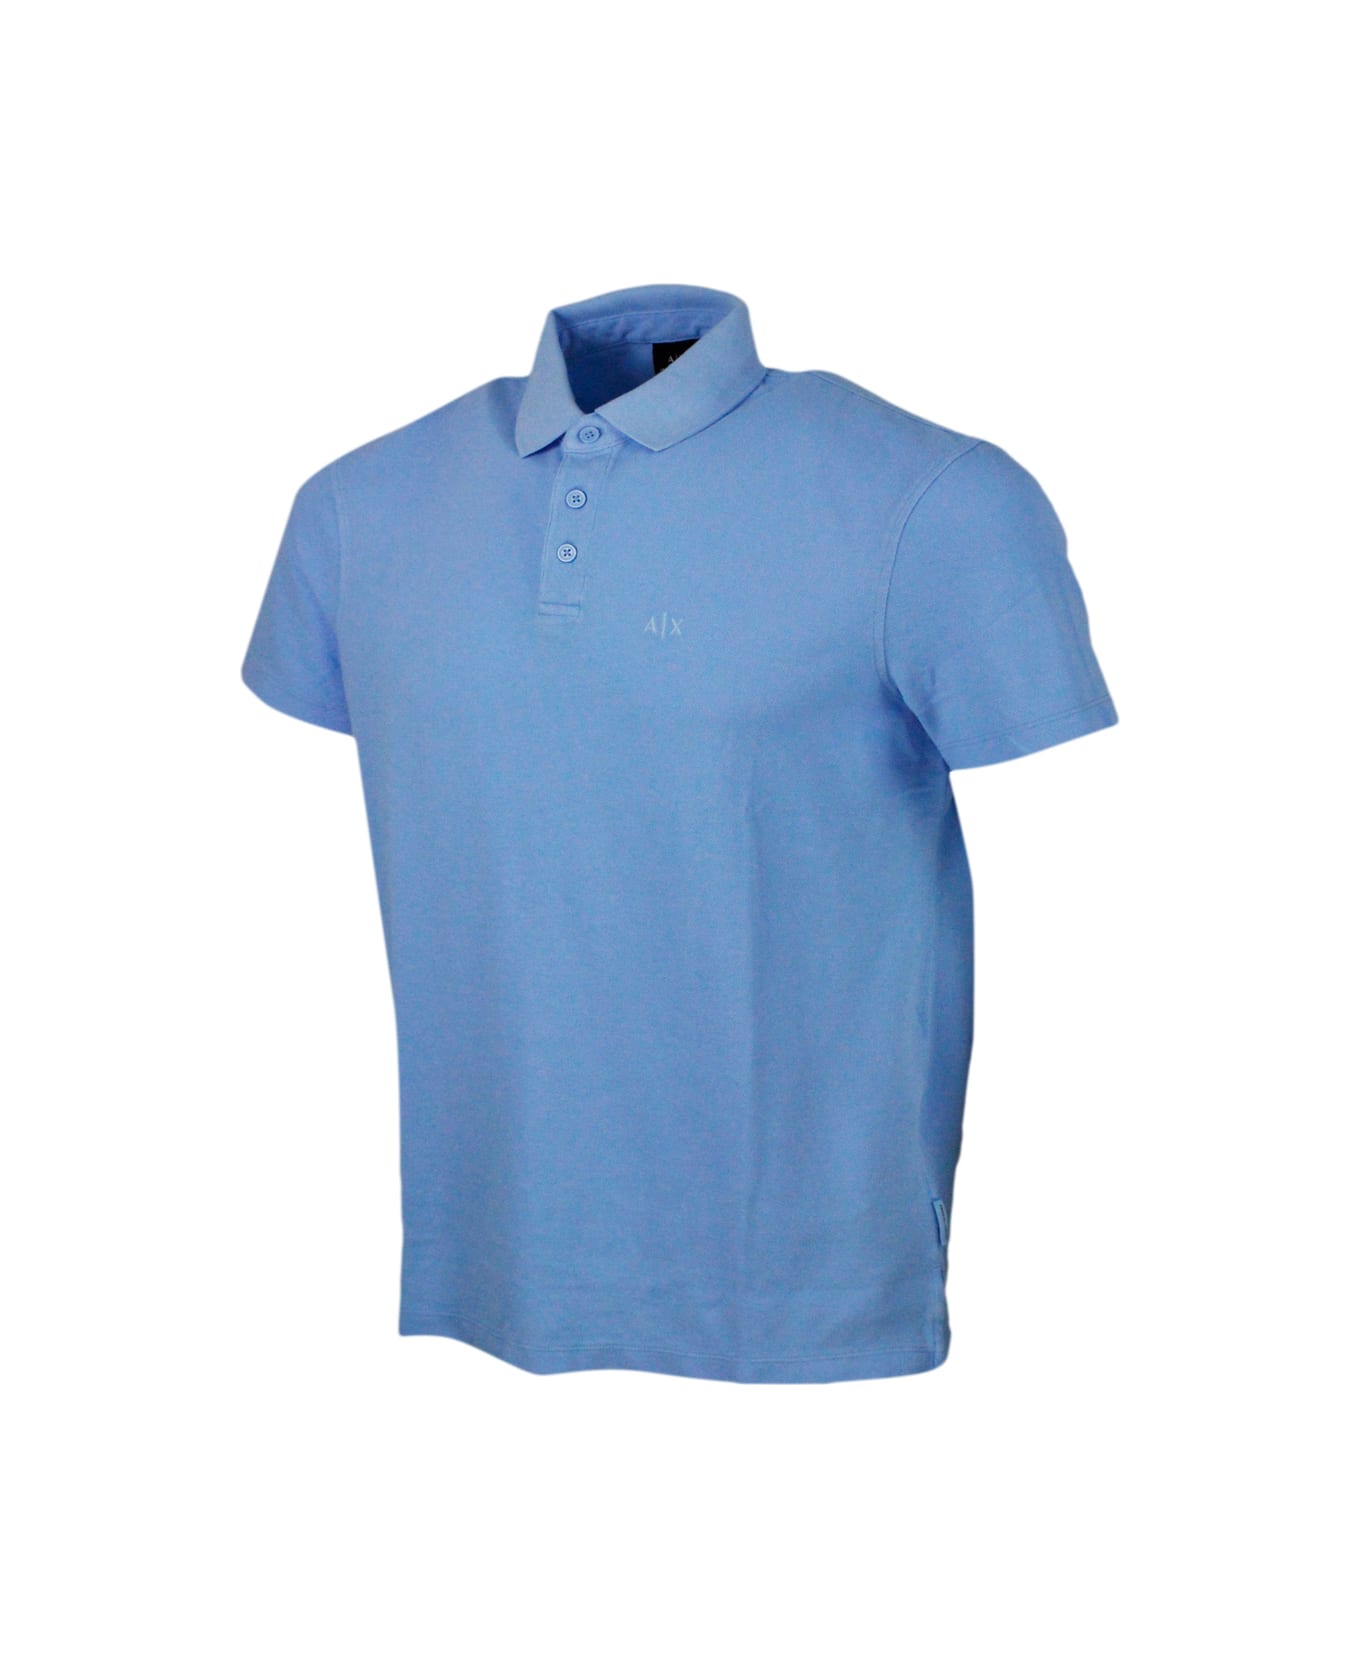 Armani Collezioni 3-button Short-sleeved Pique Cotton Polo Shirt With Logo Embroidered On The Chest - Gnawed Blue